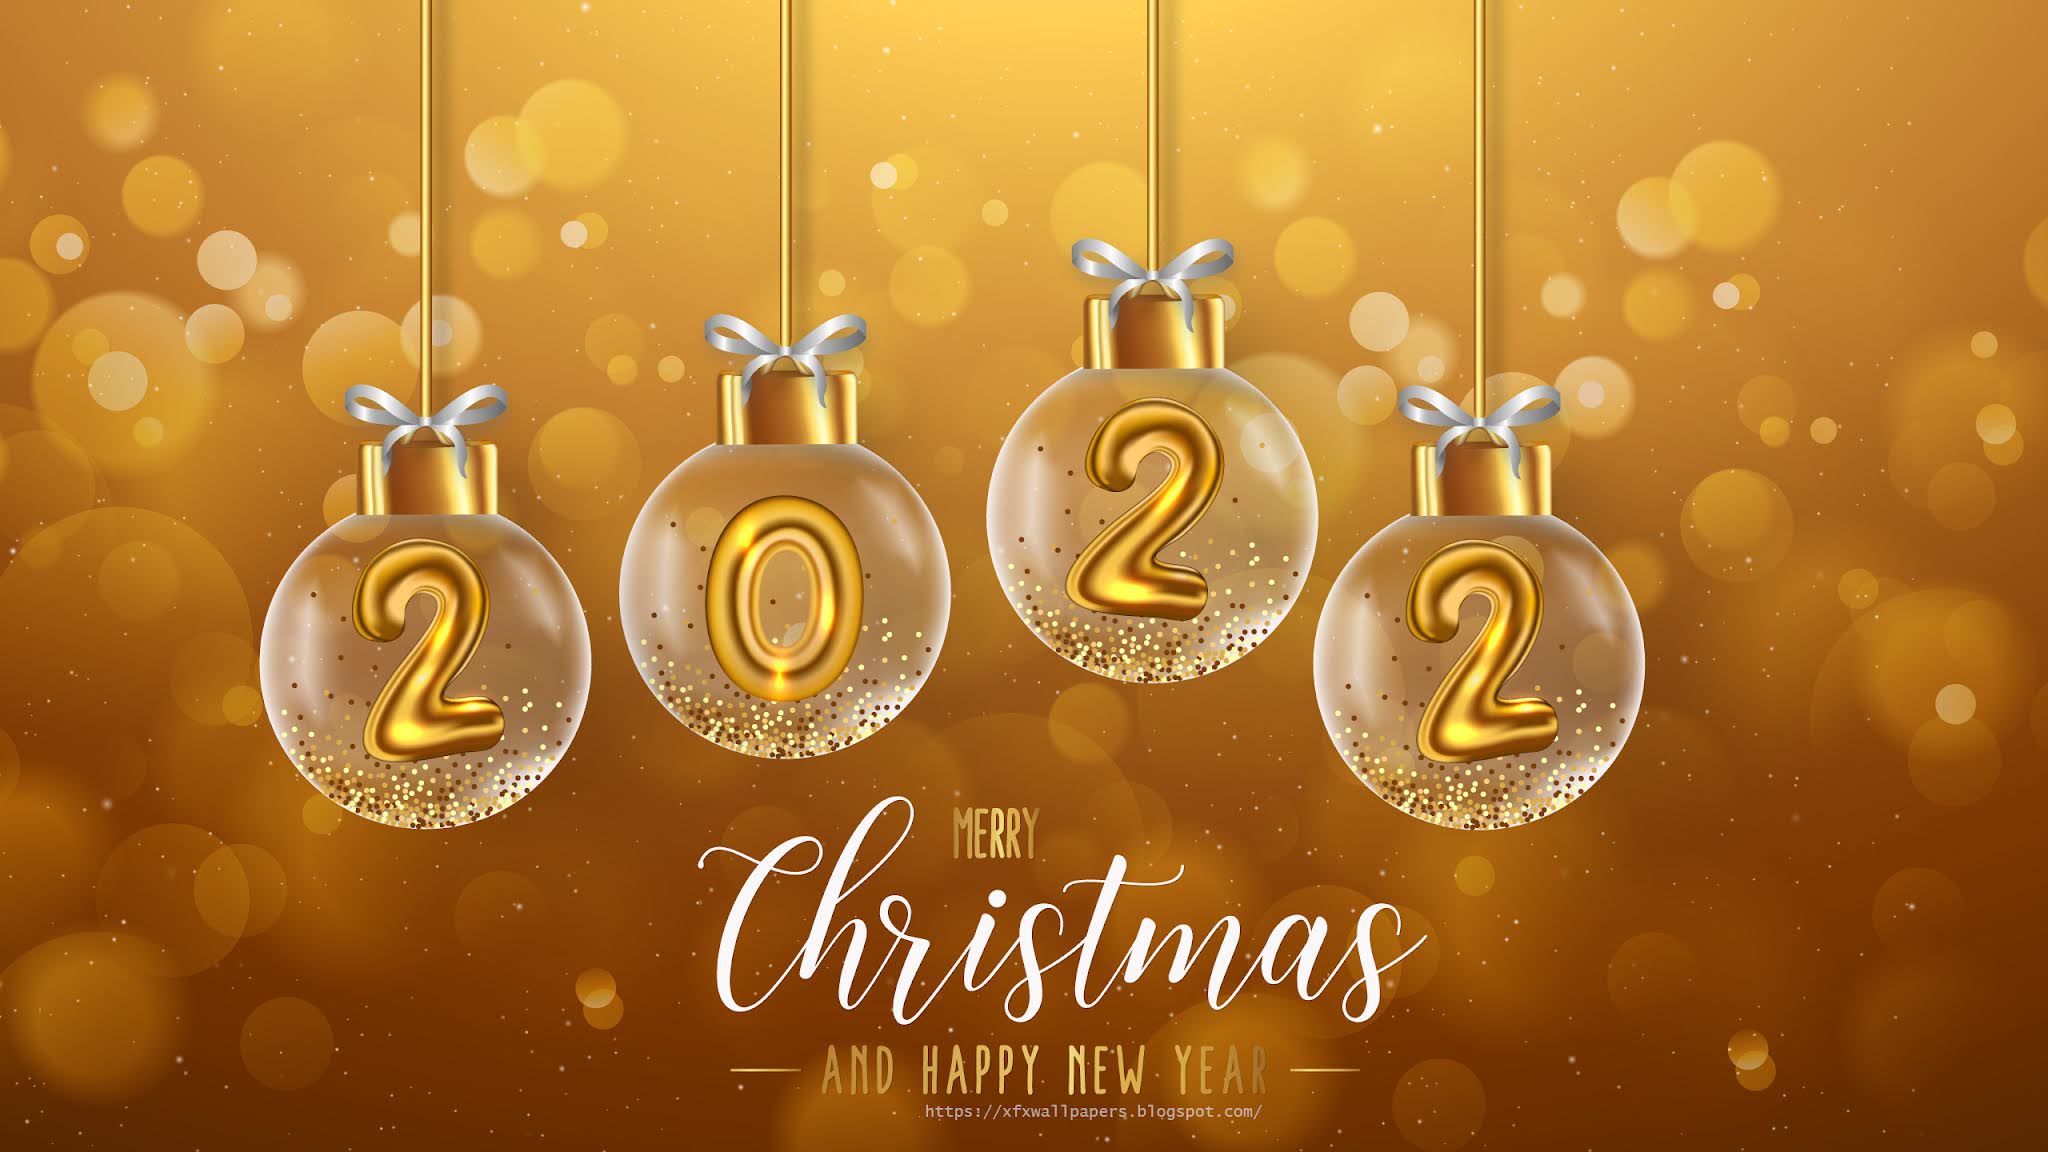 2022 Happy New Year Merry Christmas Wallpaper Free Download